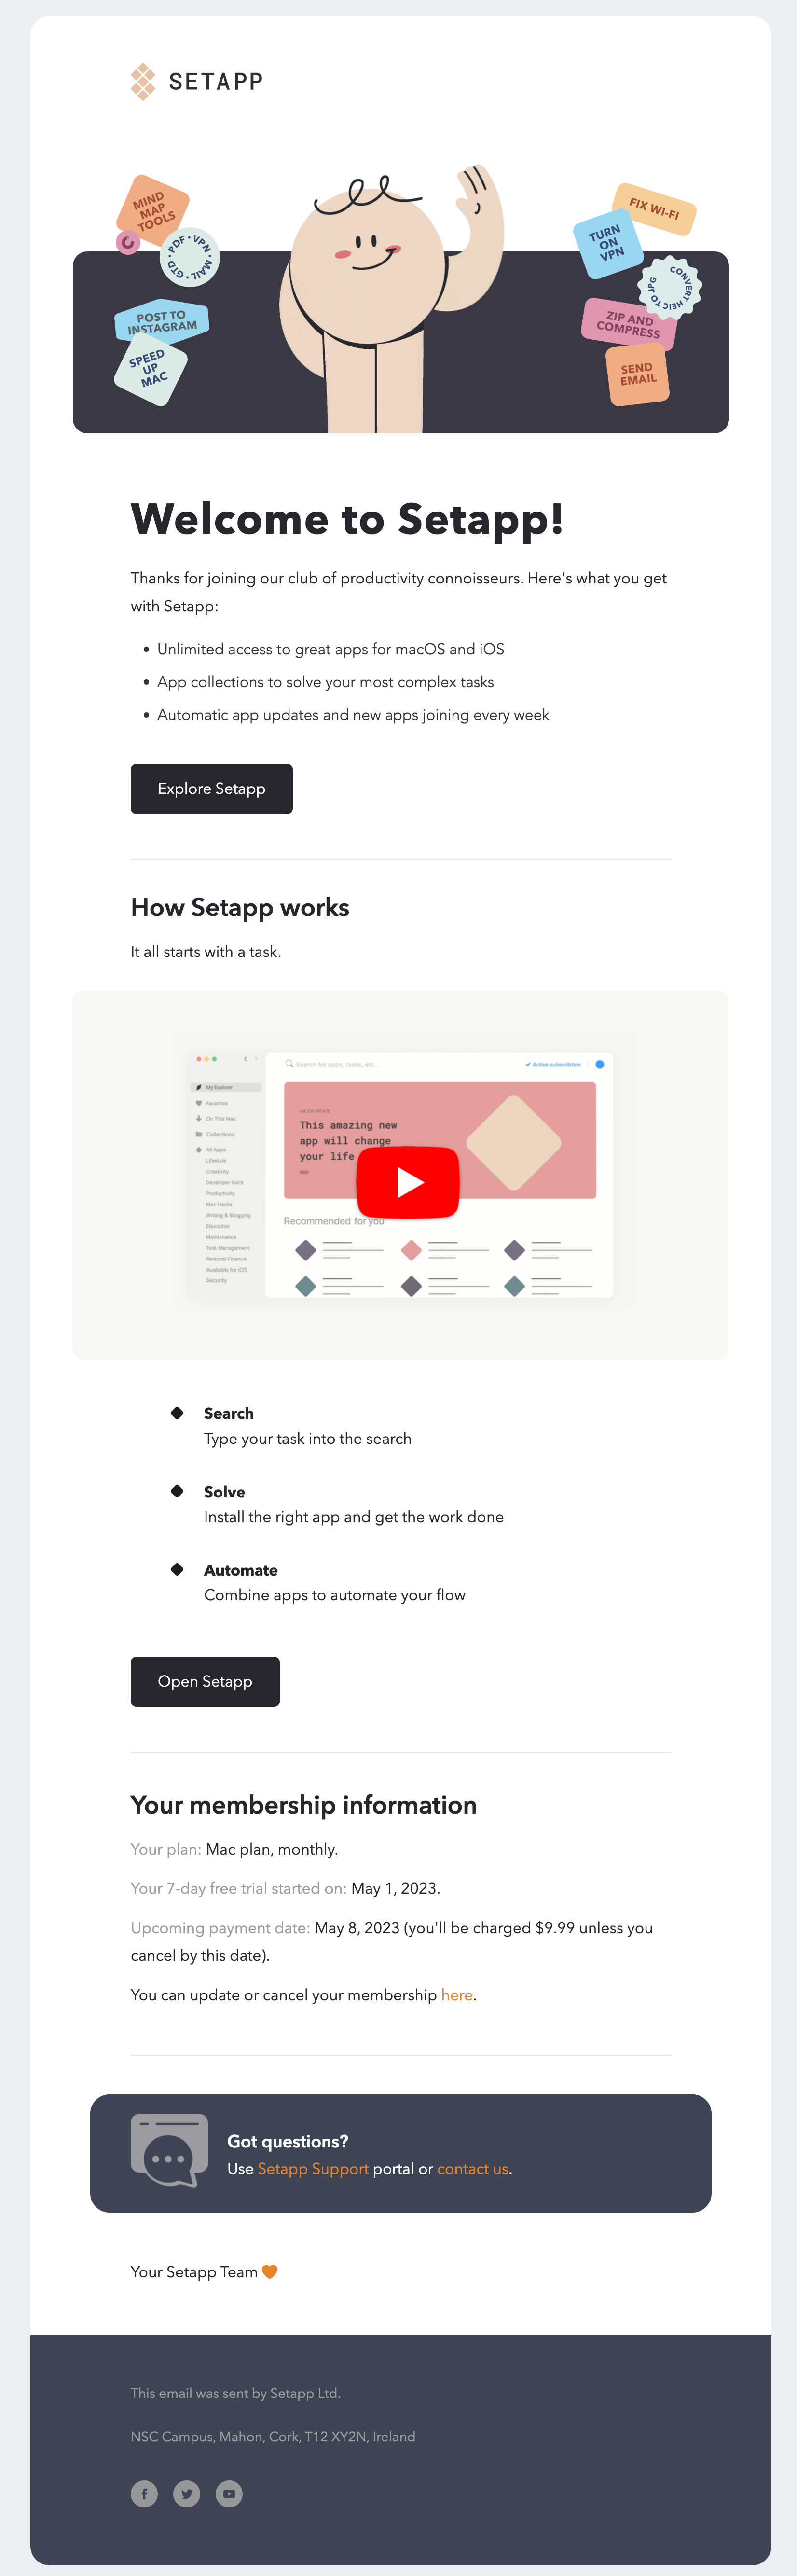 Setapp welcome email